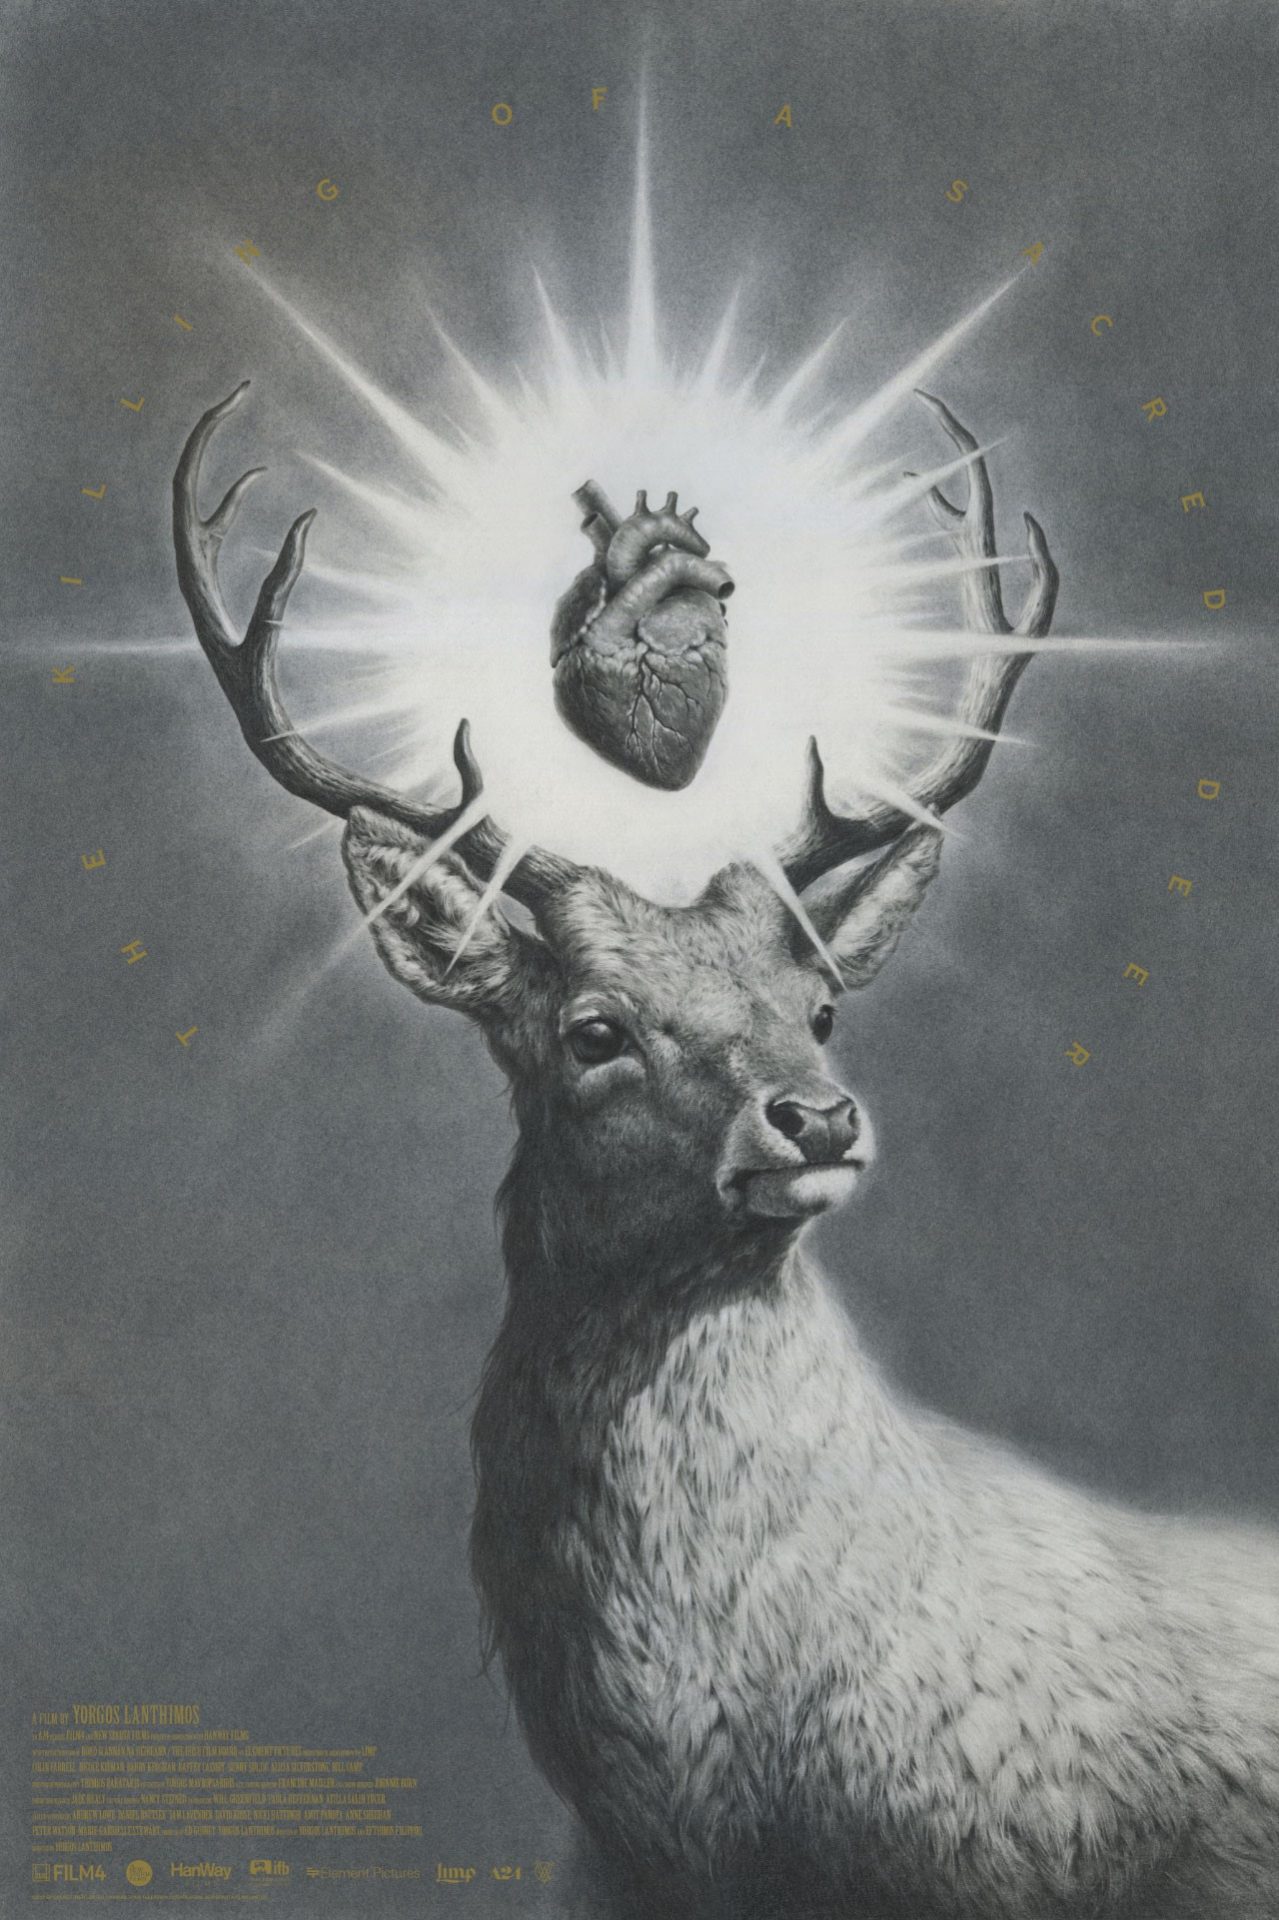 The Mondo poster for Vanessa Foley's art for A24's Killing of a Sacred Deer showing a deer with a bright glowing heart above its head.